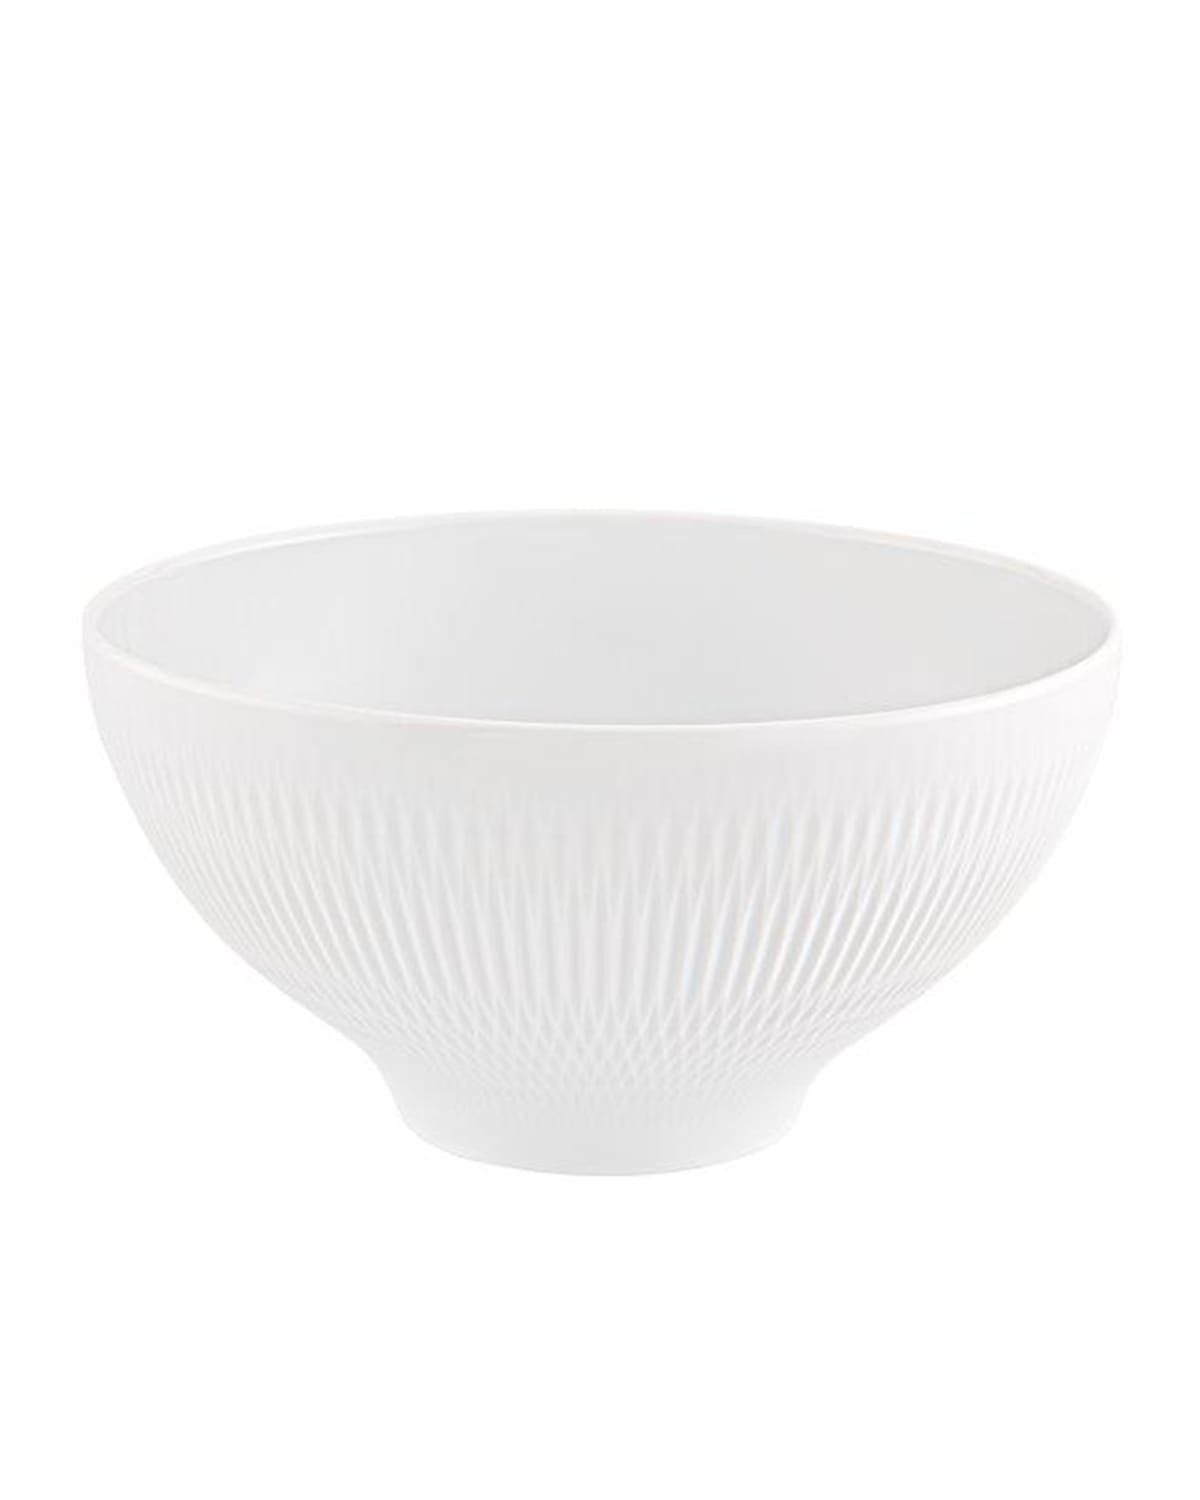 Utopia Cereal Bowls, Set of 6